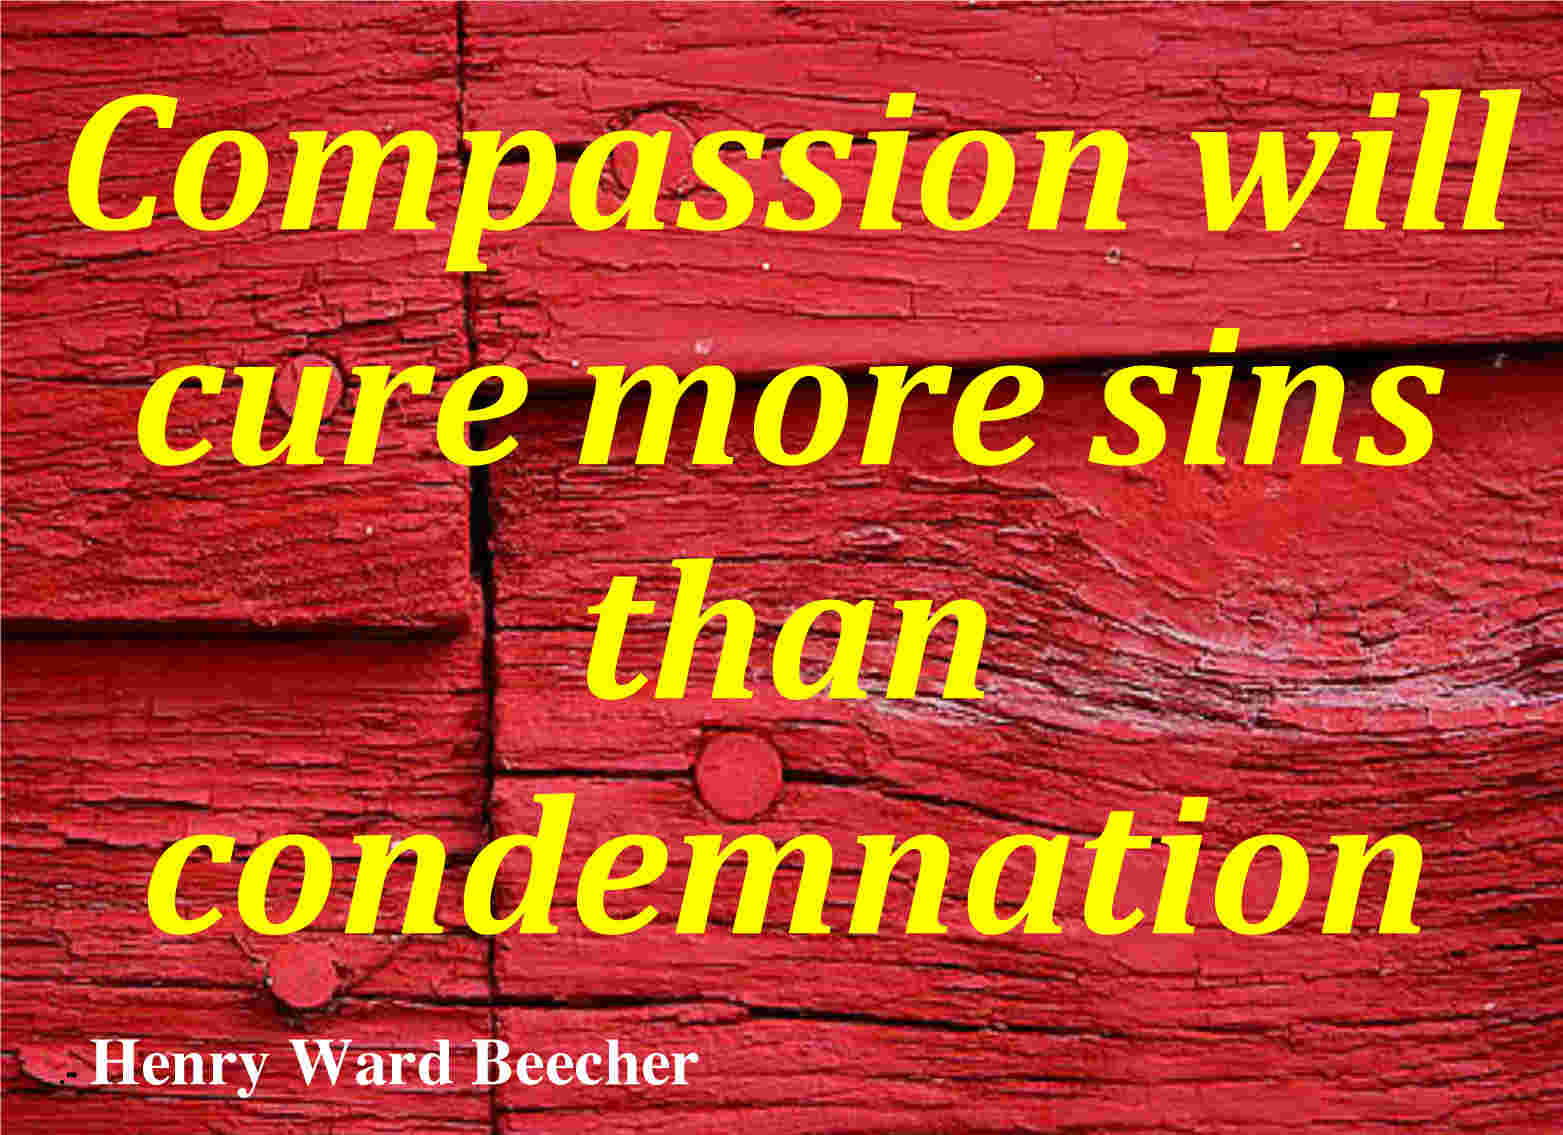 Compassion will cure more sins than condemnation.